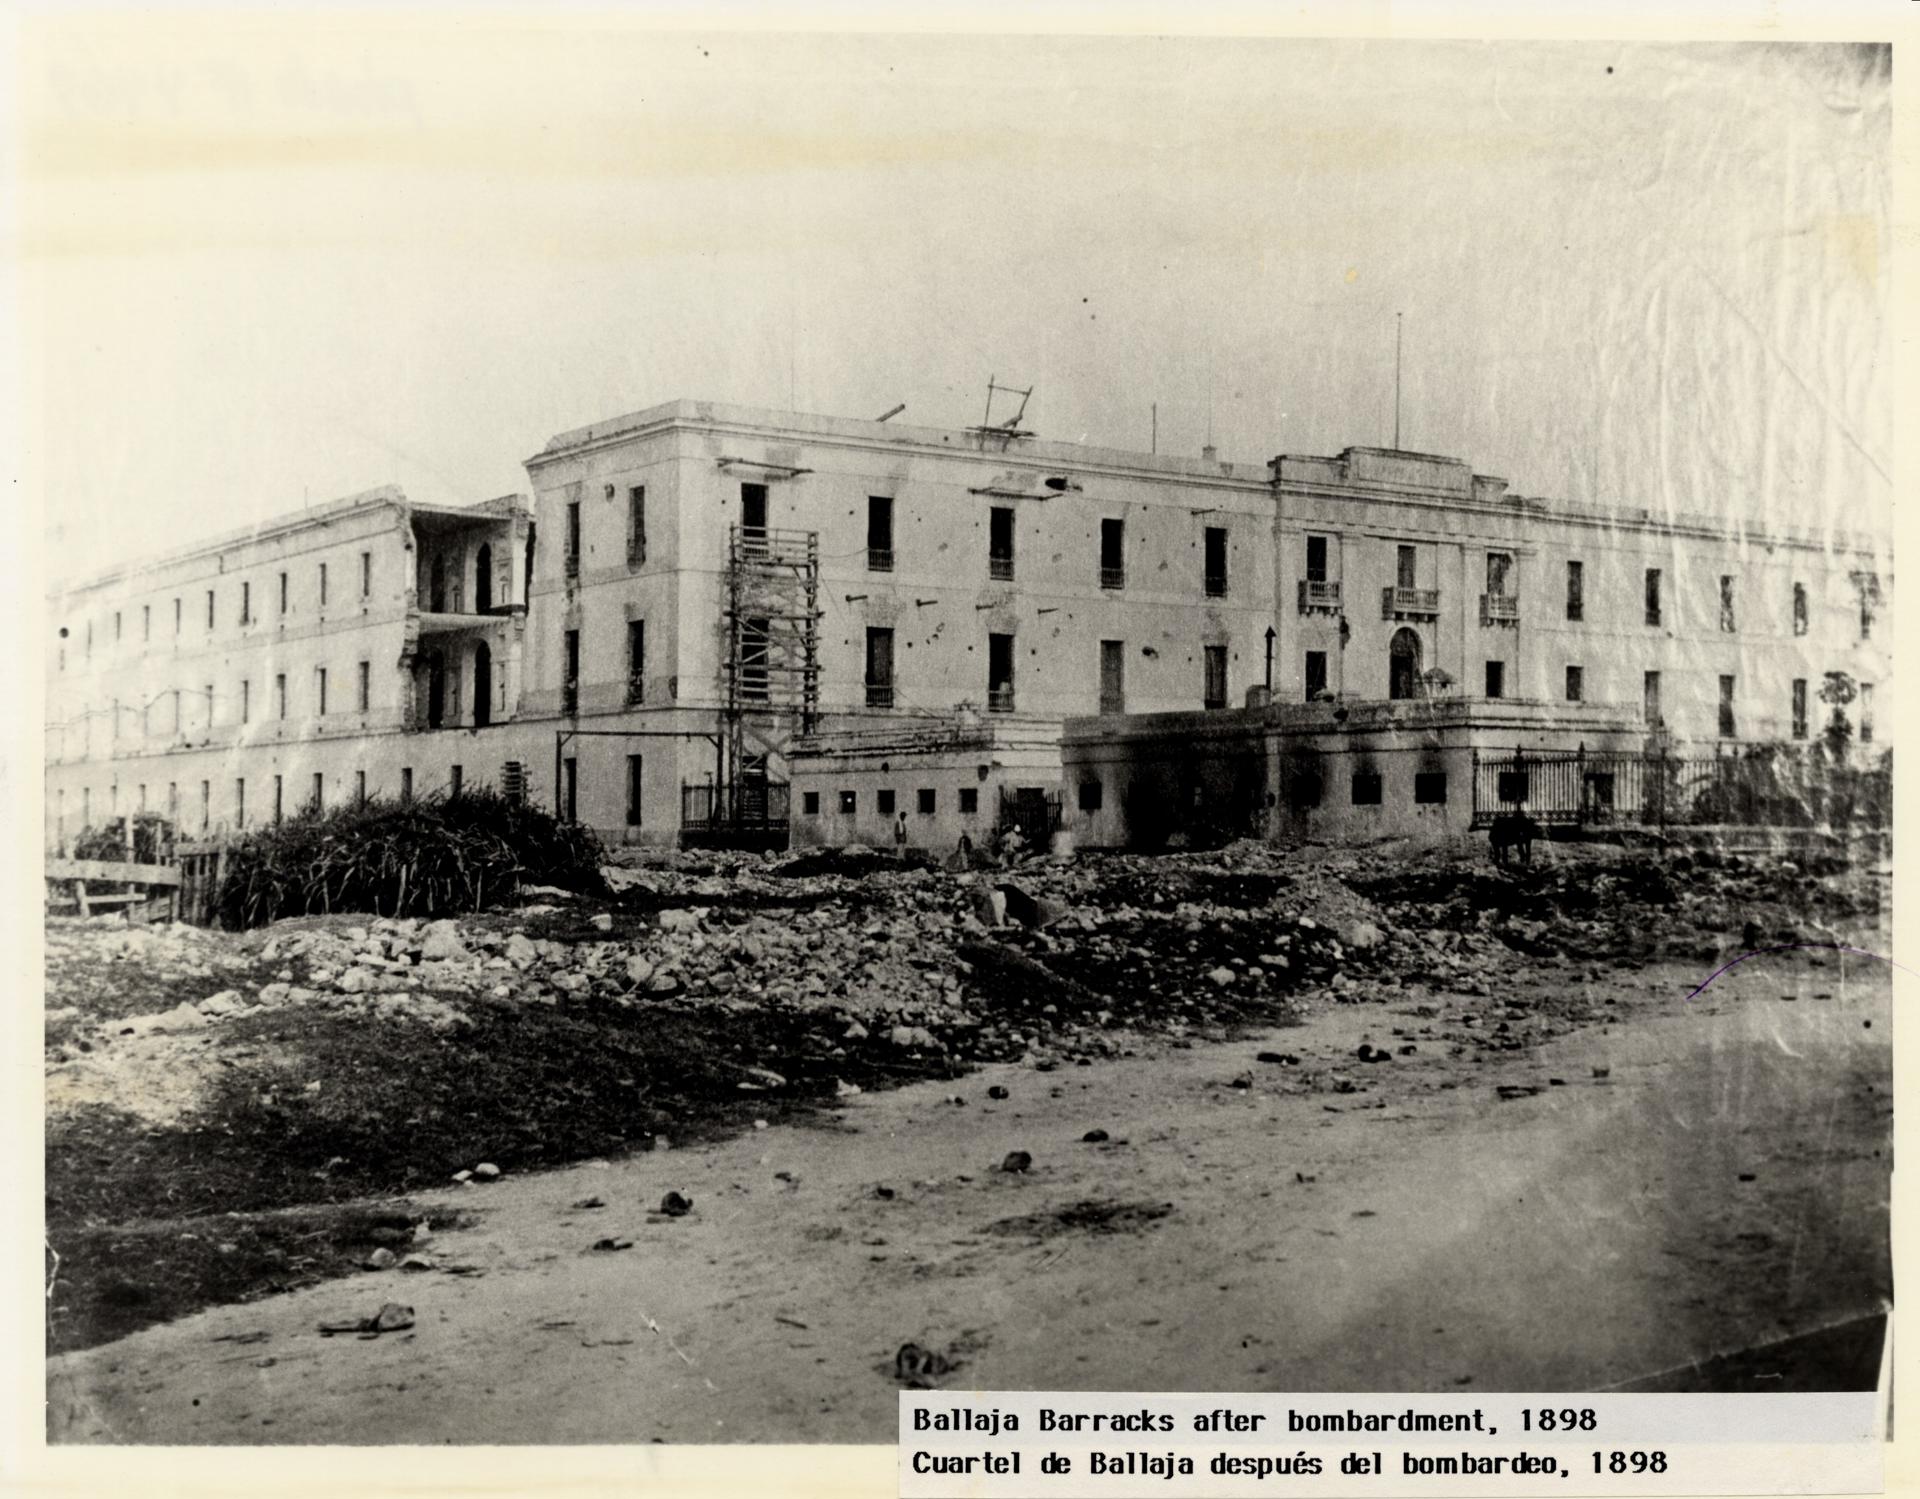 A photo provided by Puerto Rico's State Historic Preservation Office of the Ballaja Barracks in San Juan after the US bombardment of 1898. EFE/ Courtesy of Puerto Rico's State Historic Preservation Office/File EDITORIAL USE ONLY/ONLY AVAILABLE TO ILLUSTRATE THE NEWS ITEM IT ACCOMPANIES (MANDATORY CREDIT)